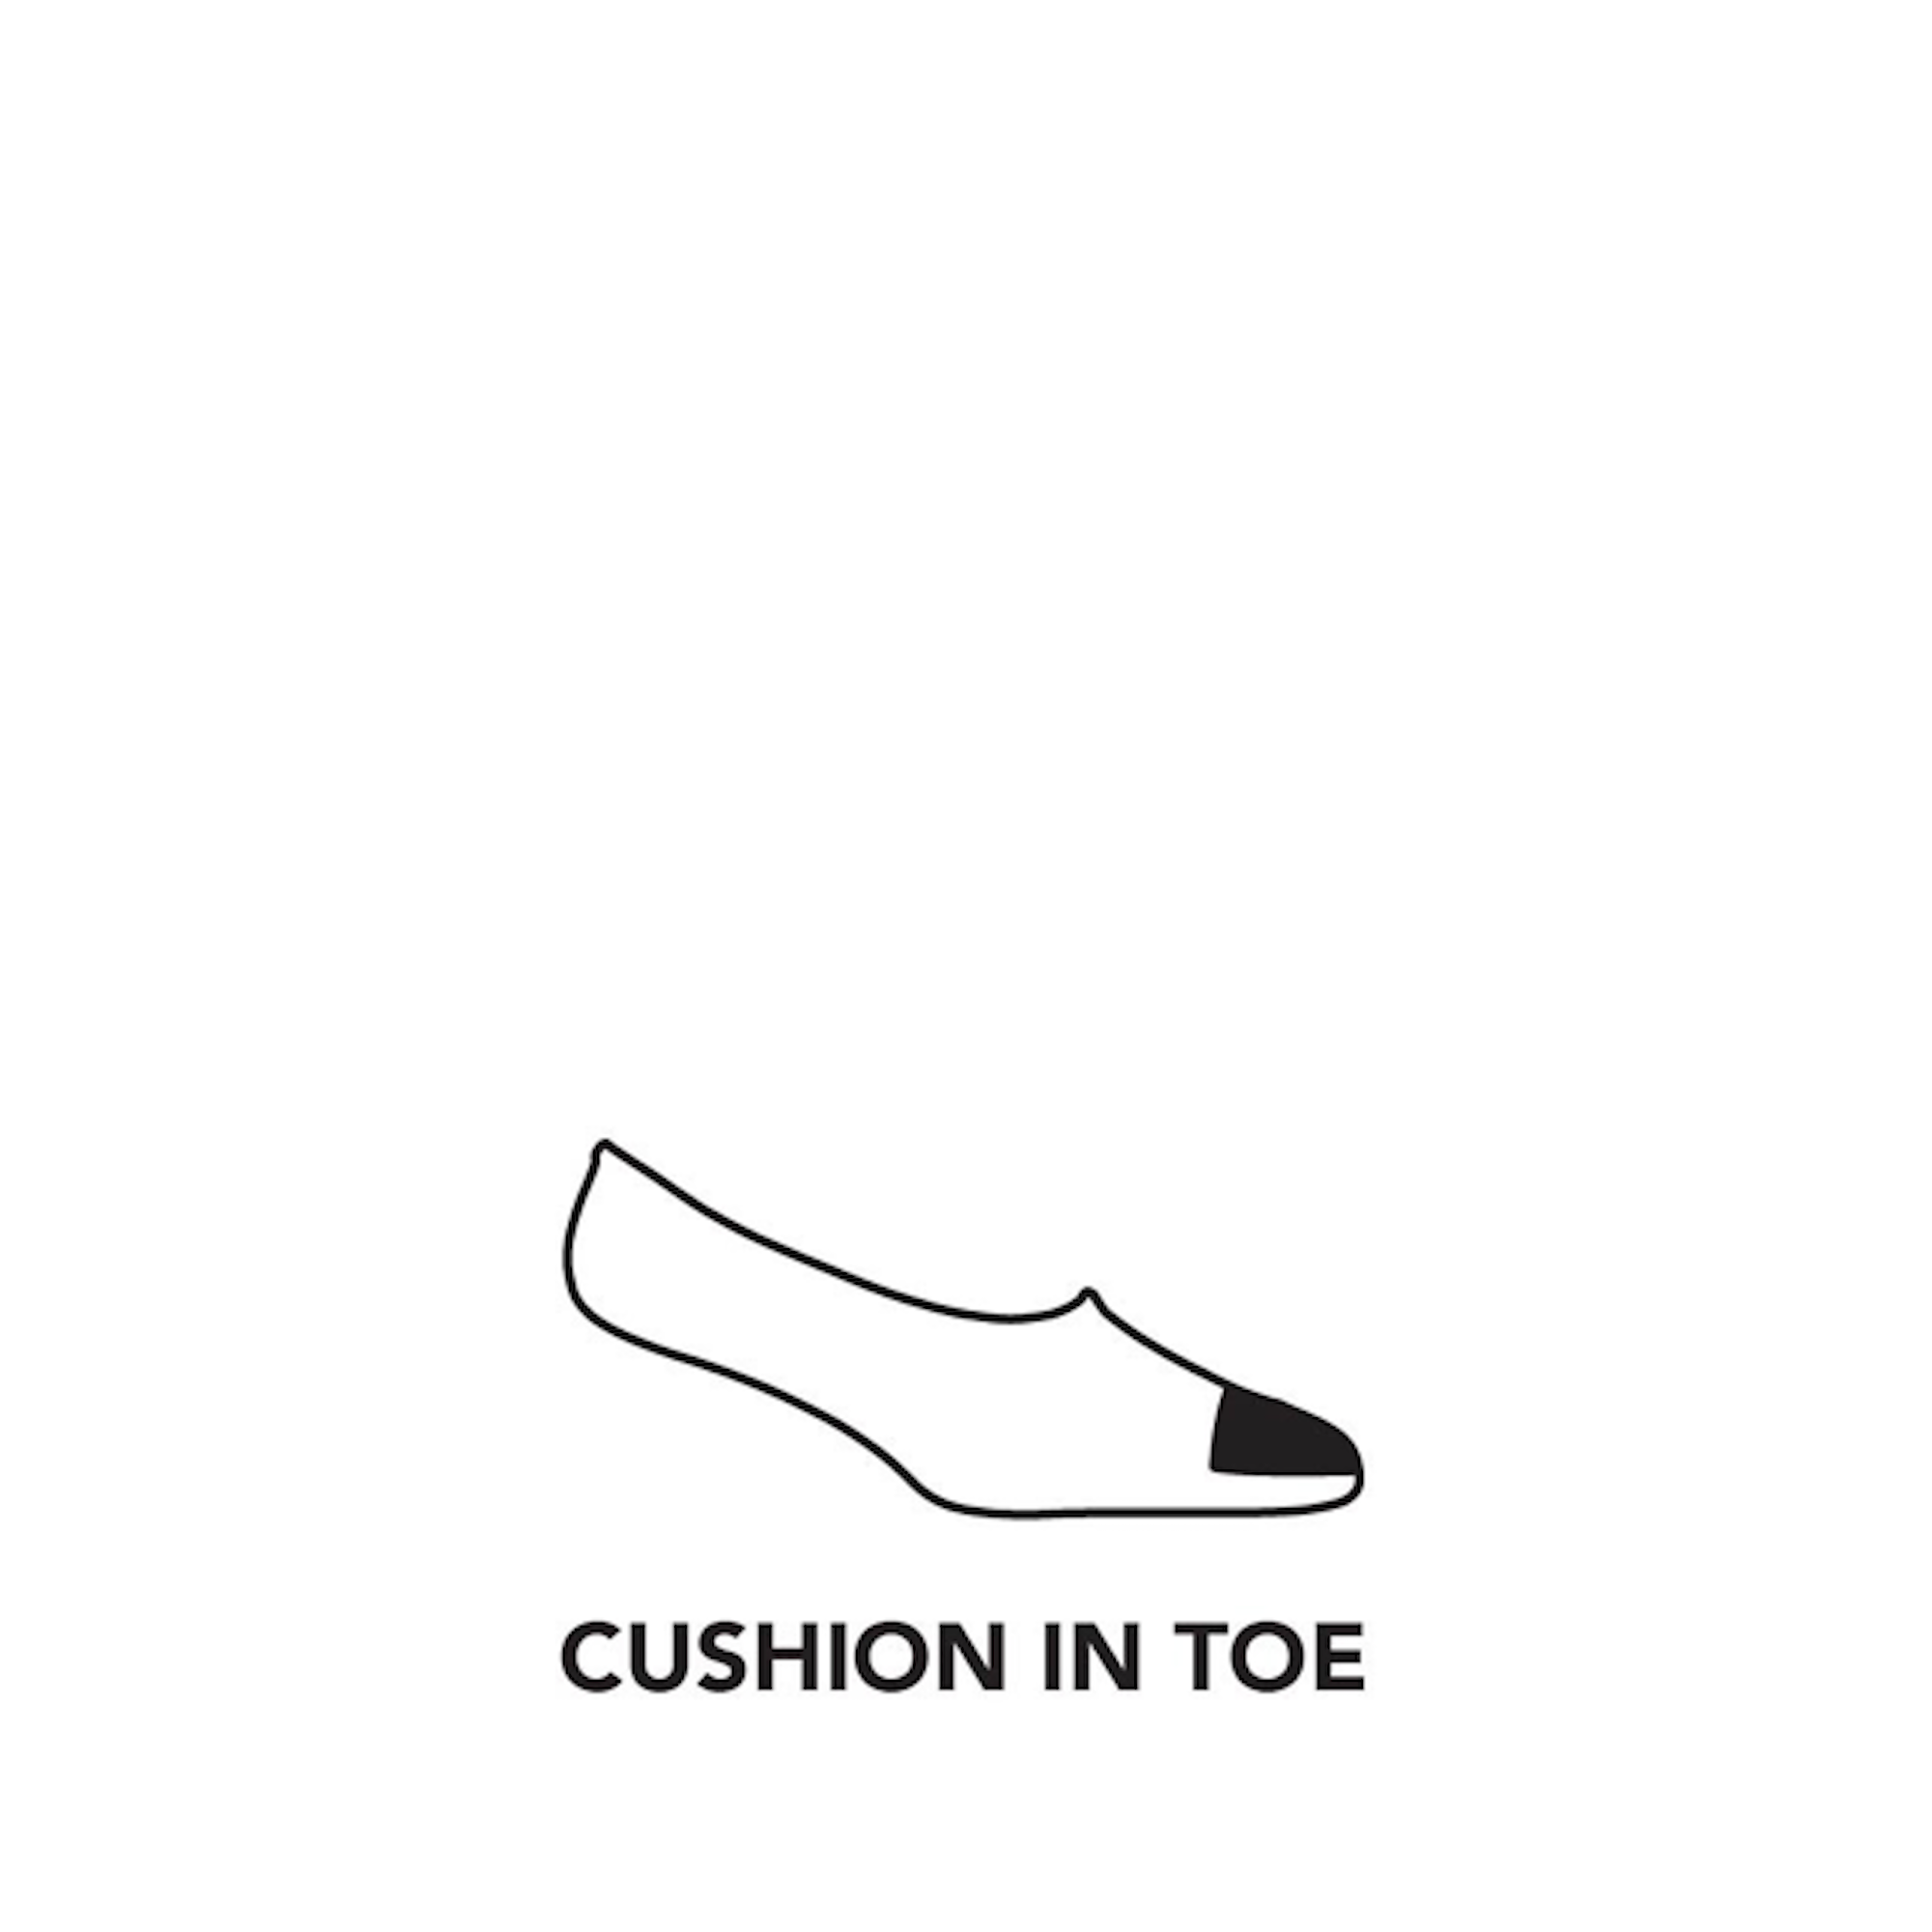 No show hidden cushion map showing cushioning only in the toe